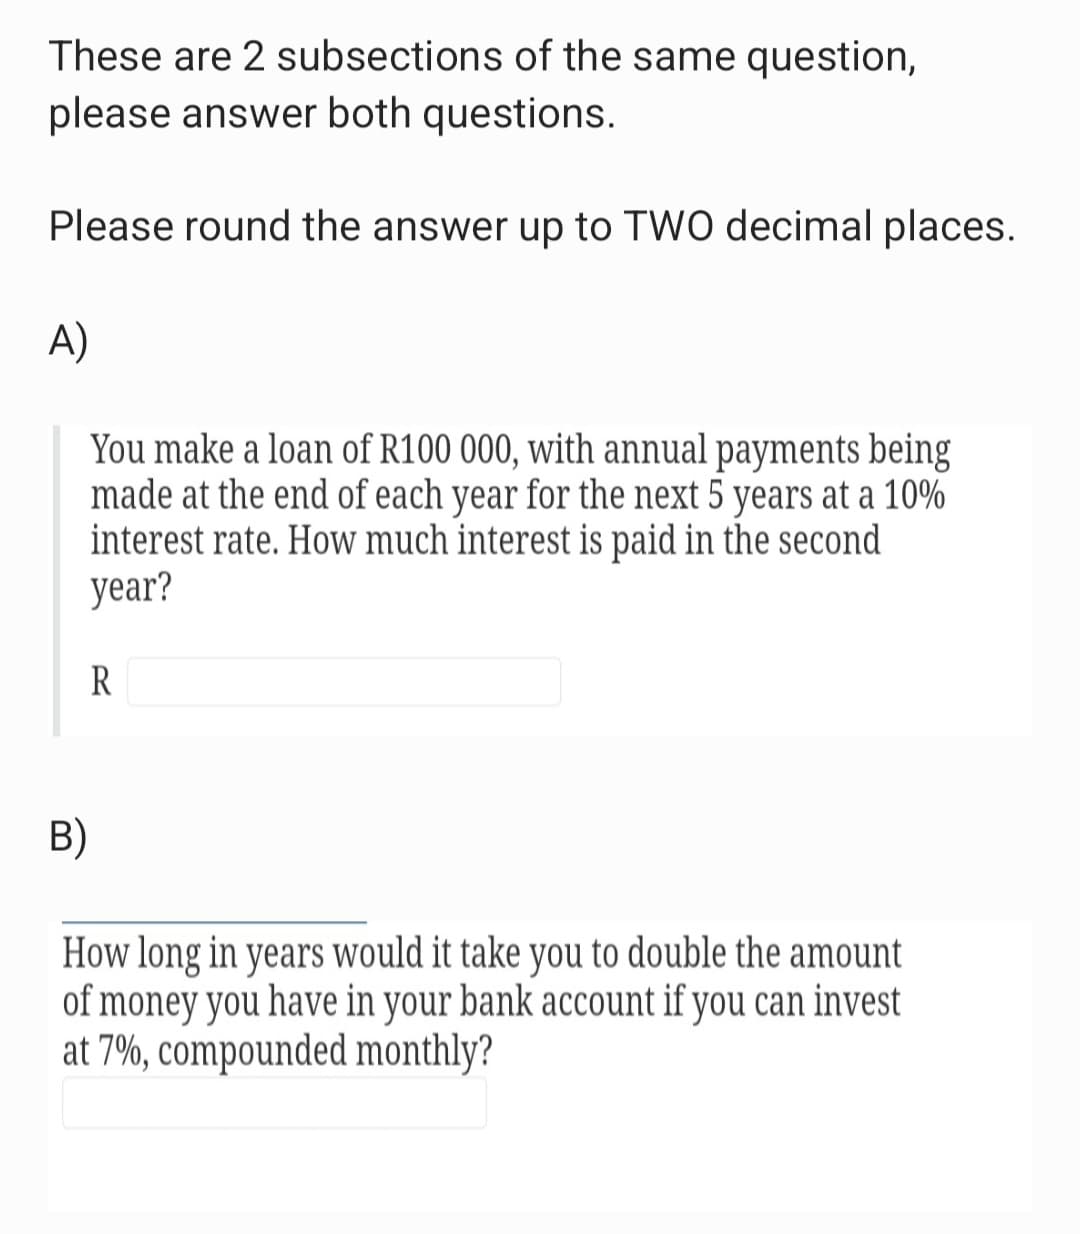 These are 2 subsections of the same question,
please answer both questions.
Please round the answer up to TWO decimal places.
A)
You make a loan of R100 000, with annual payments being
made at the end of each year for the next 5 years at a 10%
interest rate. How much interest is paid in the second
year?
R
B)
How long in years would it take you to double the amount
of money you have in your bank account if you can invest
at 7%, compounded monthly?